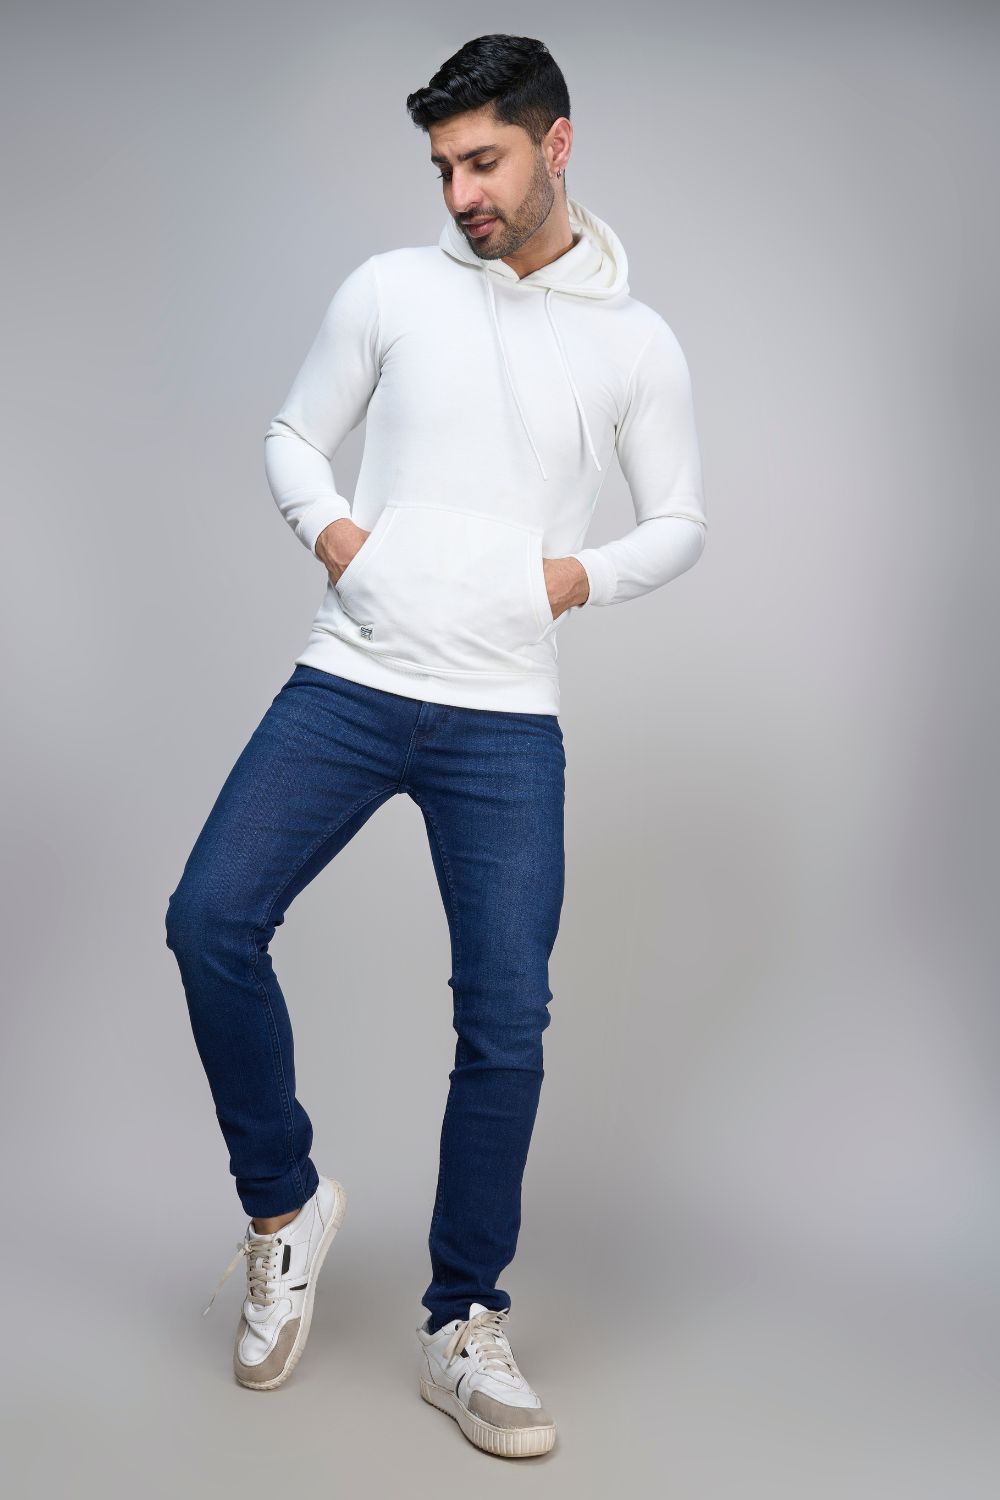 Hoodie for men with full sleeves and relaxed fit in the color White.